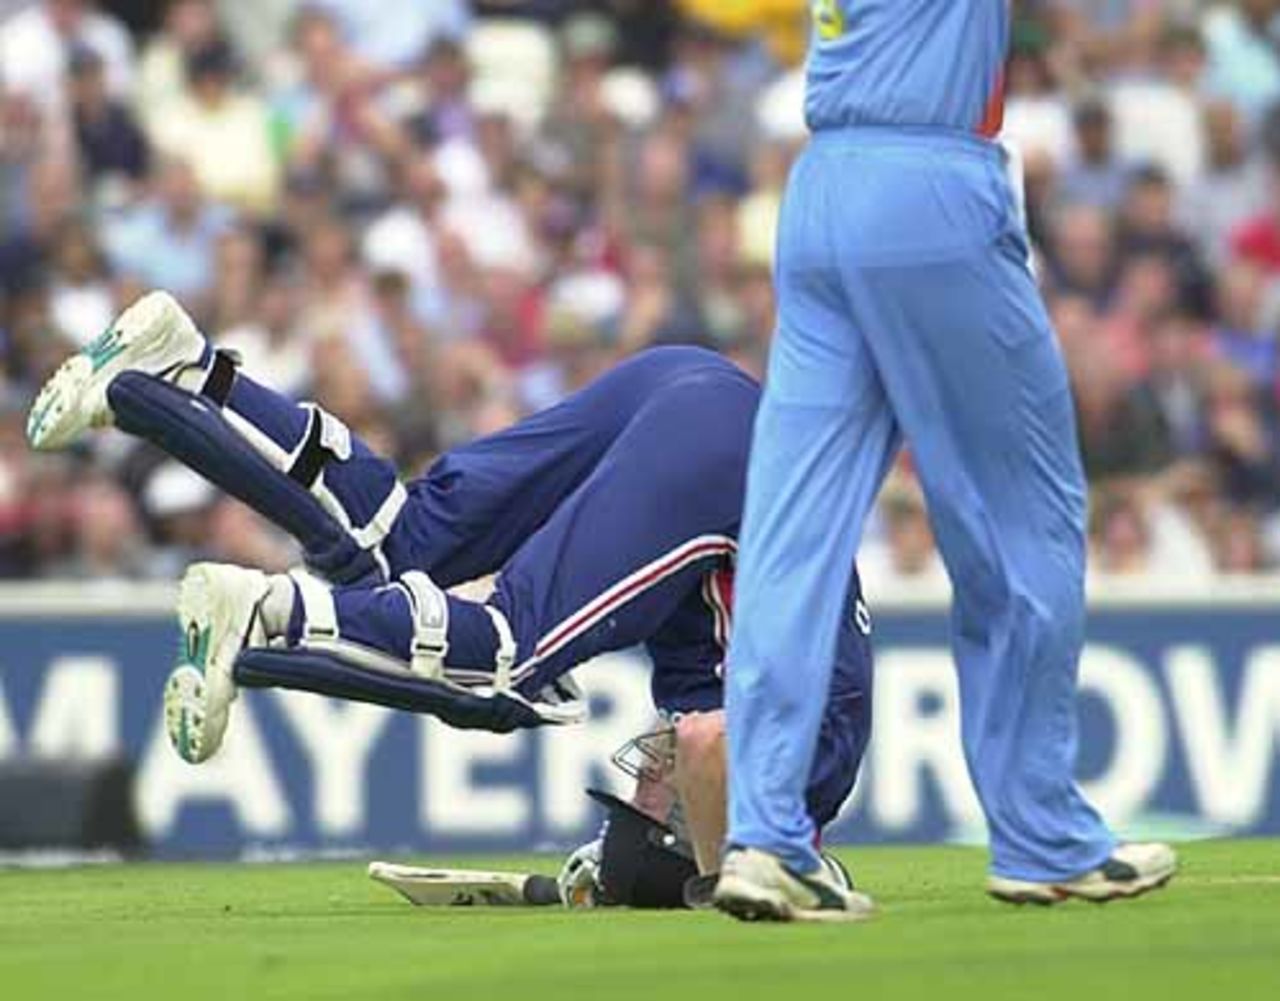 Freddie Flintoff takes a tumble as he struggles home safe in his innings of 51, England v India at The Oval, July 2002